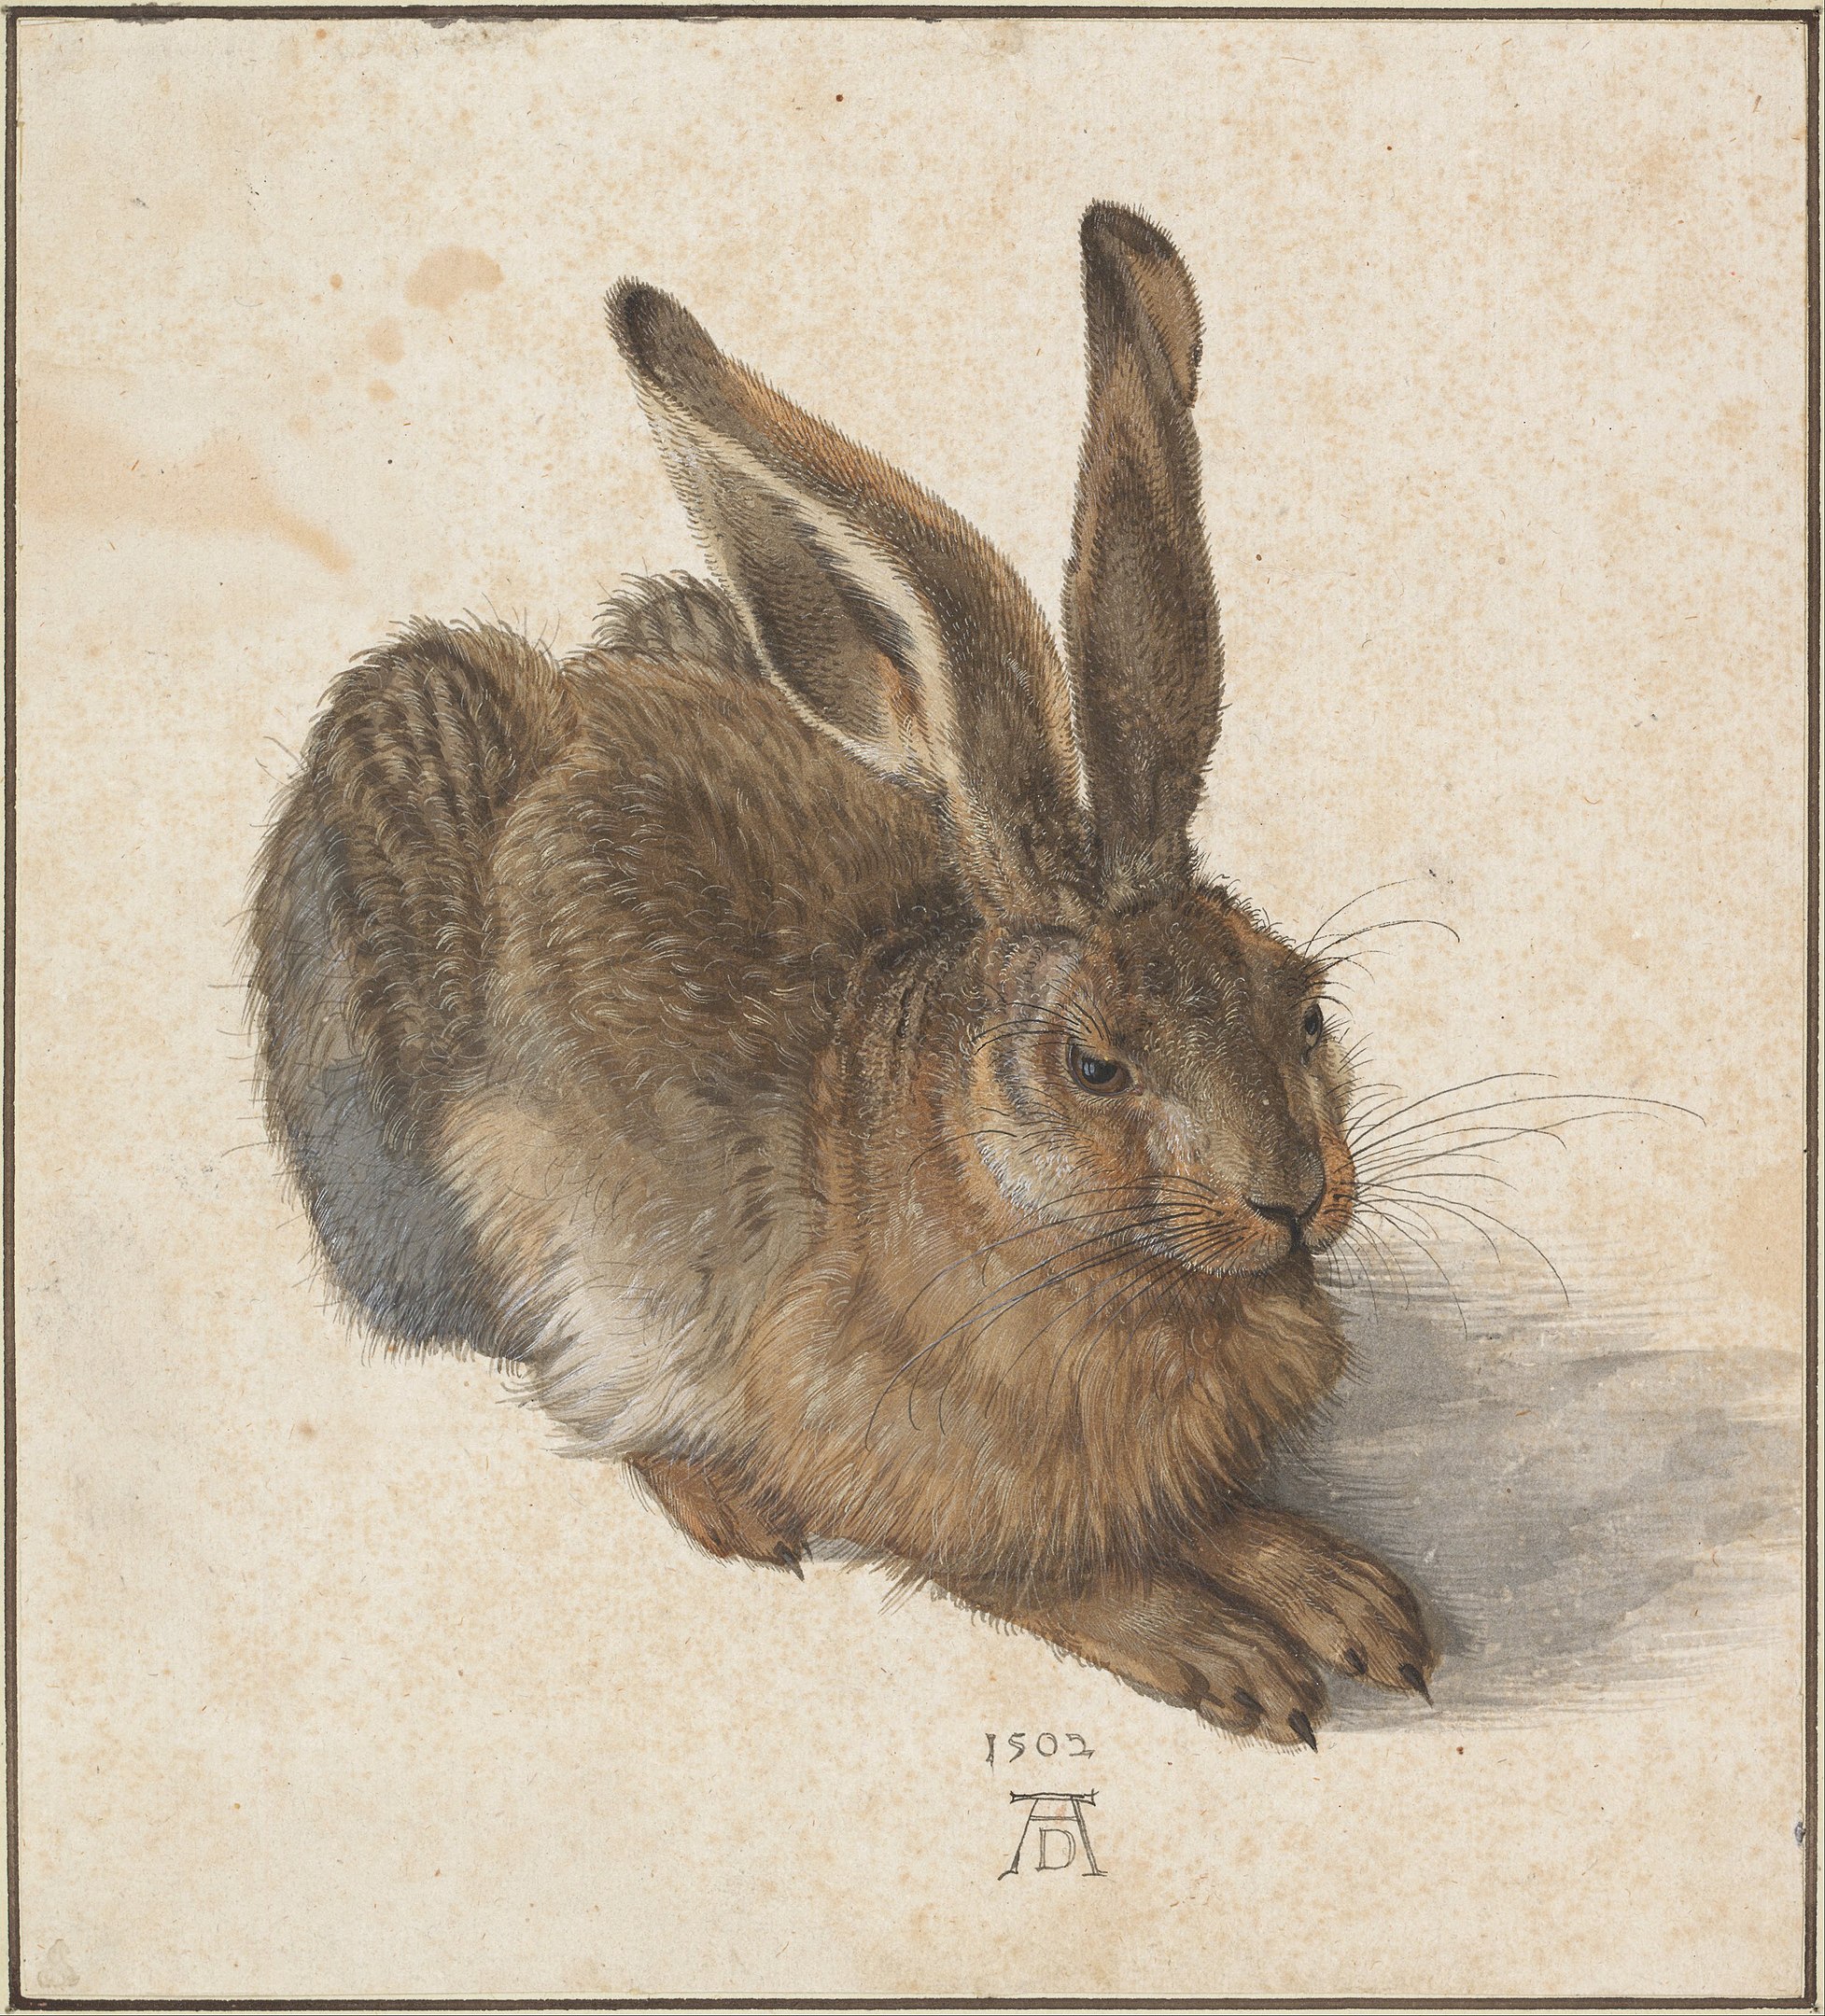 A realistic painting of the image of a hare sitting peacefully.